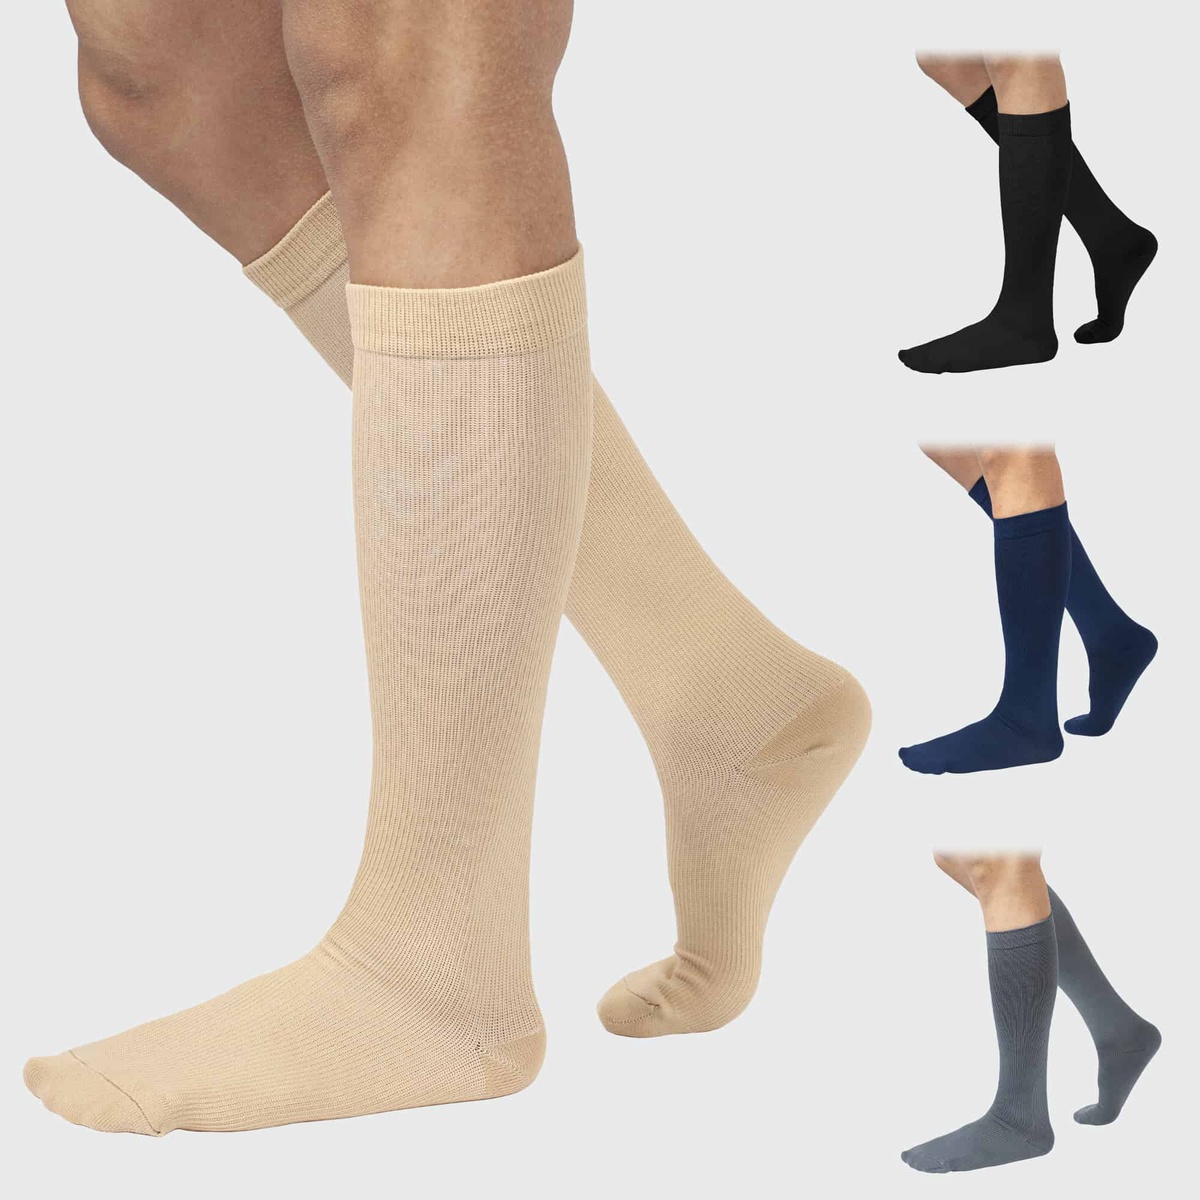 The Benefits of Compression Socks for Women And How to Use Them